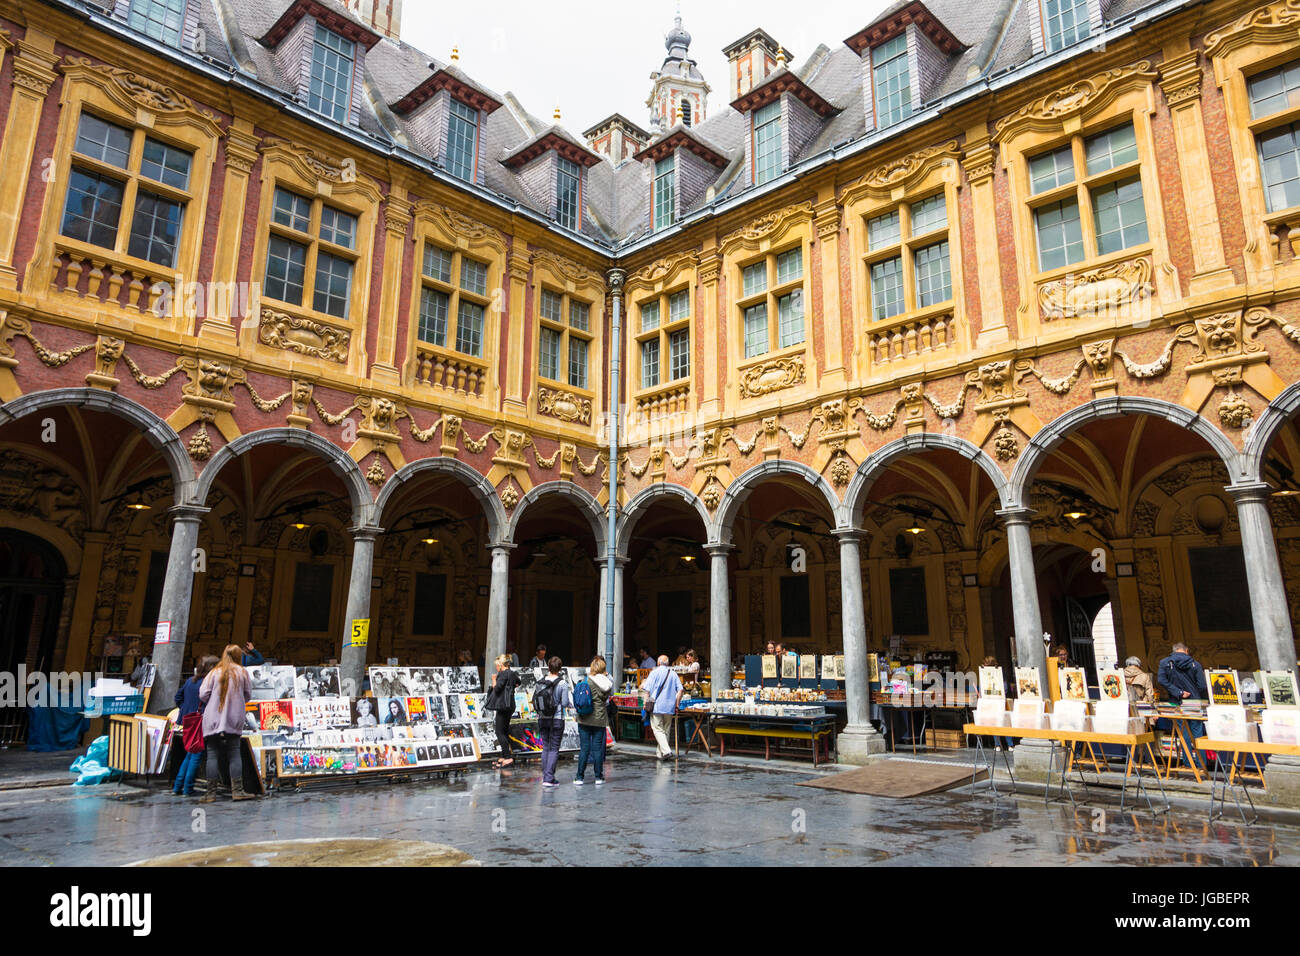 Market in La Vieille Bourse (Old Stock Exchange) in Lille, France Stock Photo